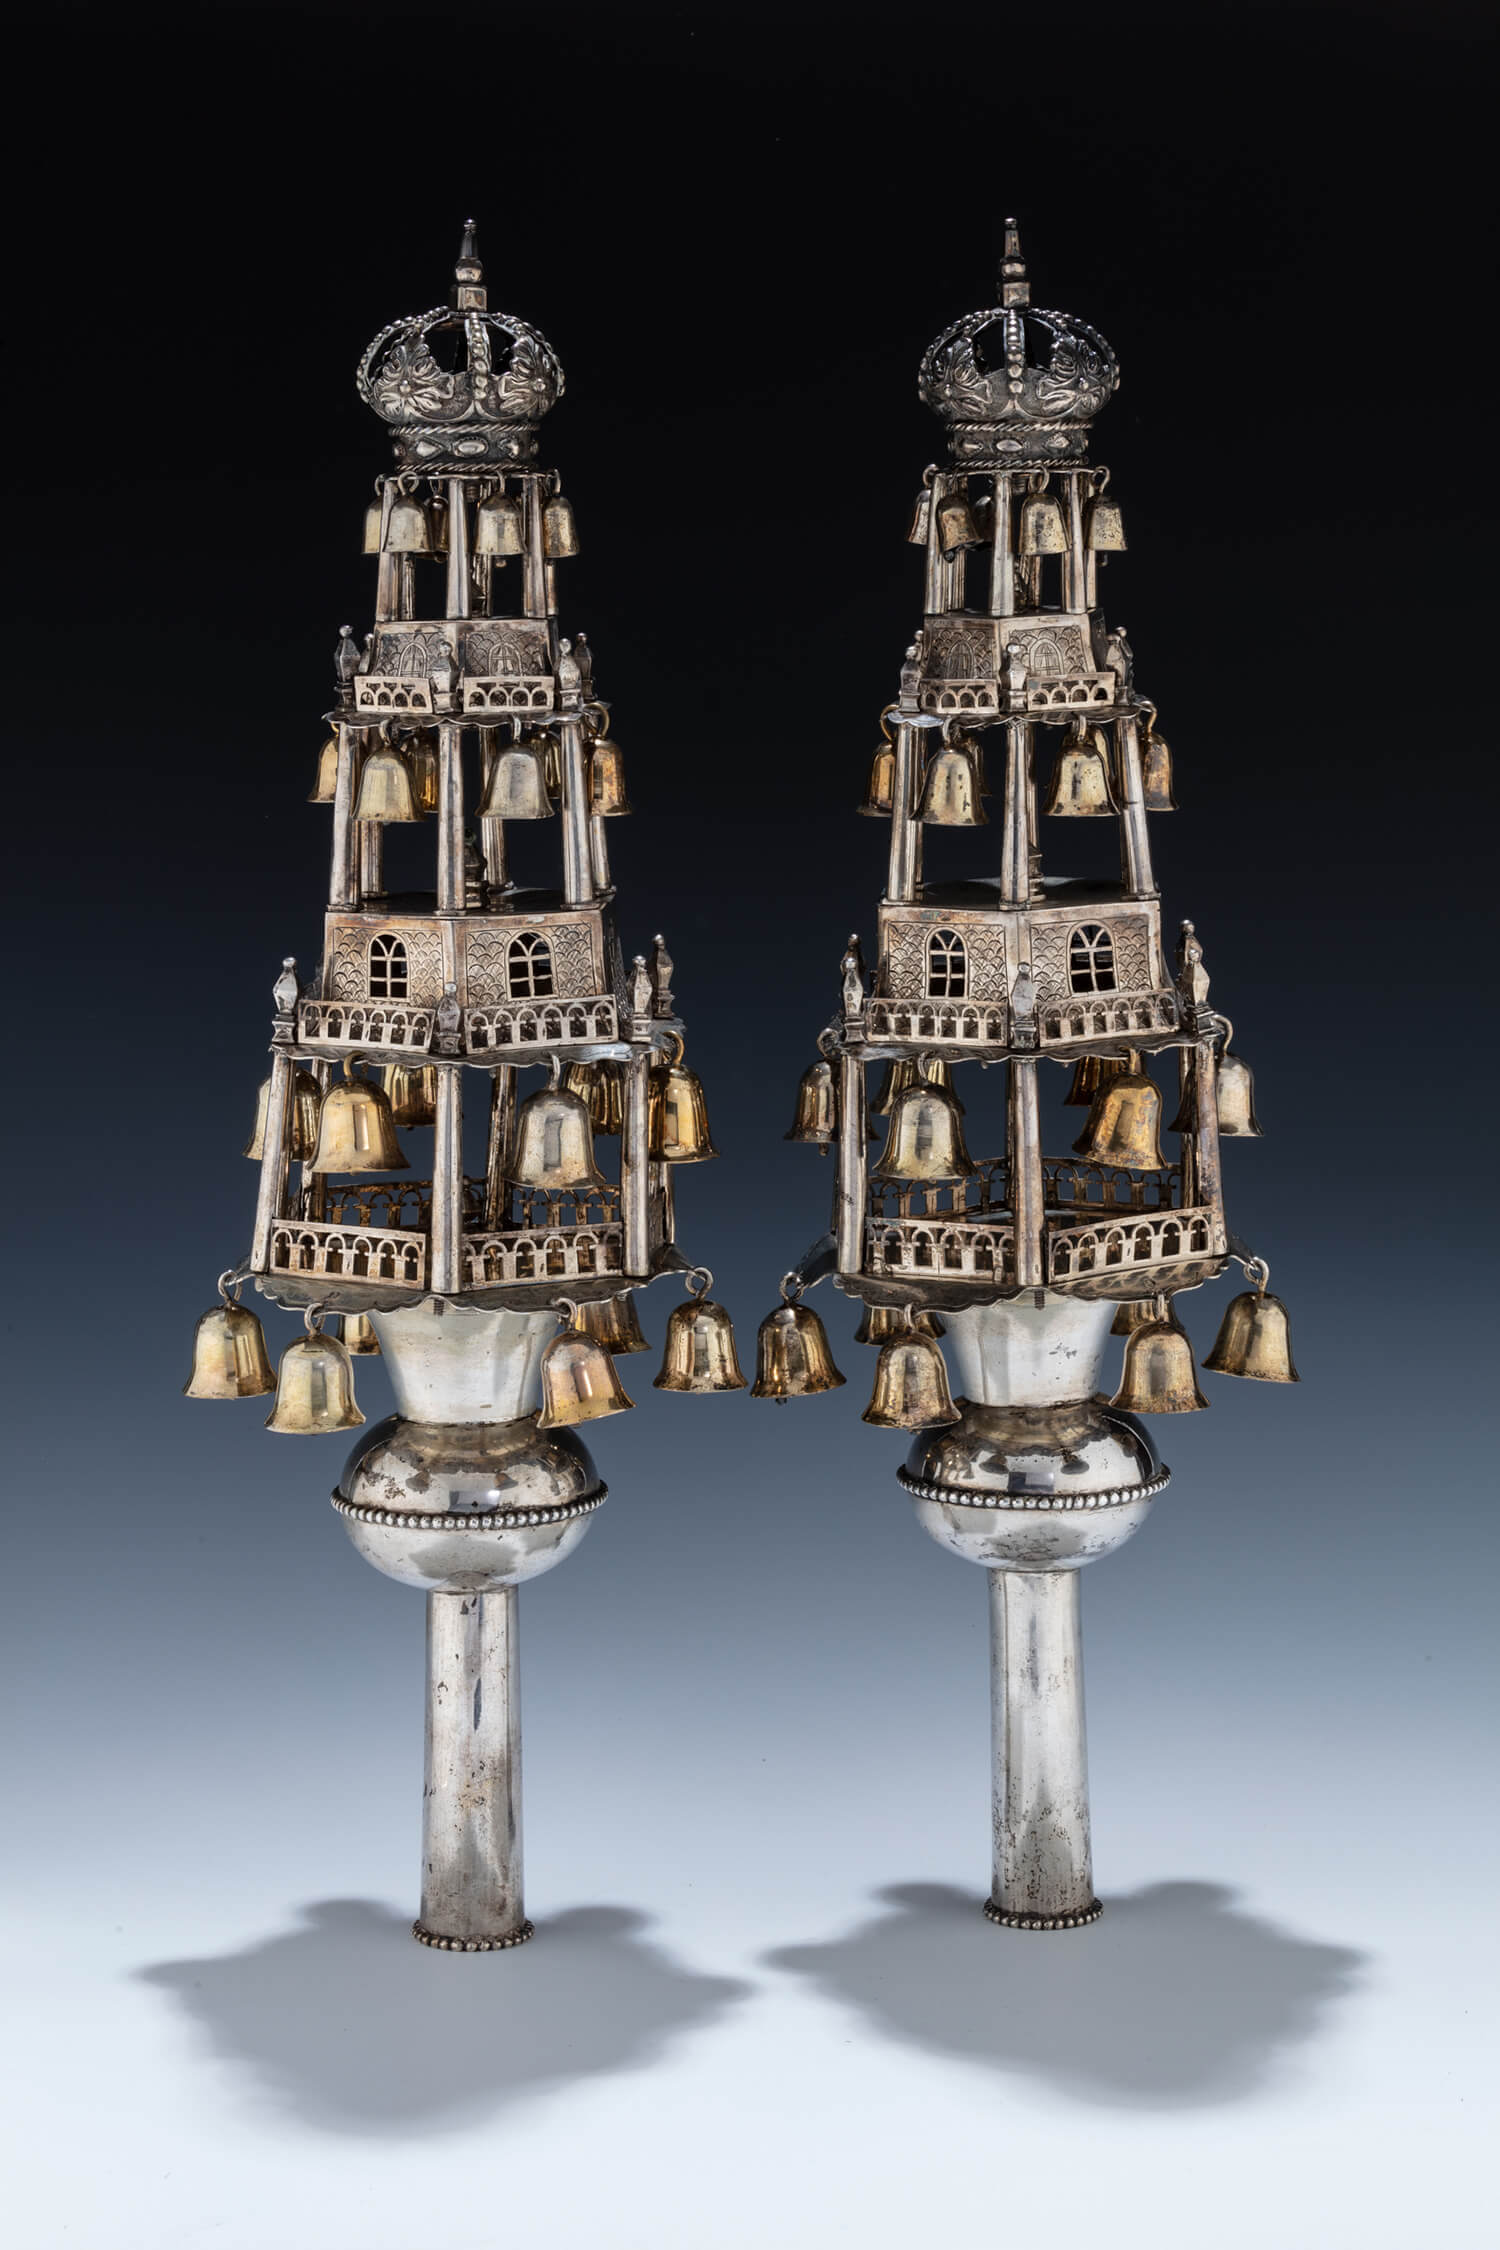 144. A RARE AND IMPORTANT PAIR OF SILVER TORAH FINIALS